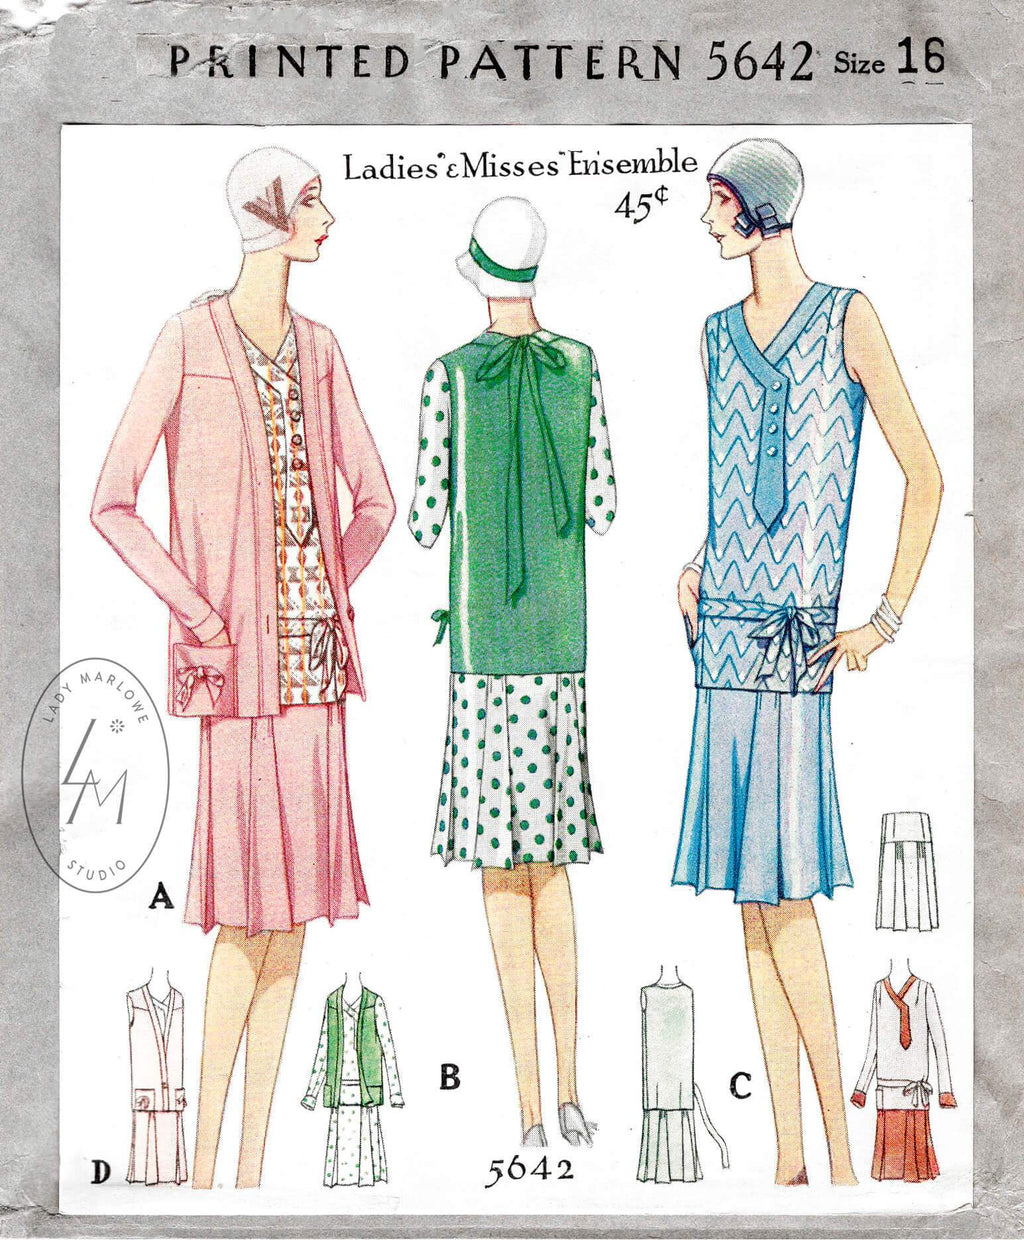 1928 1920s flapper dress and jacket ensemble McCall 5642 vintage sports dress sewing pattern reproduction